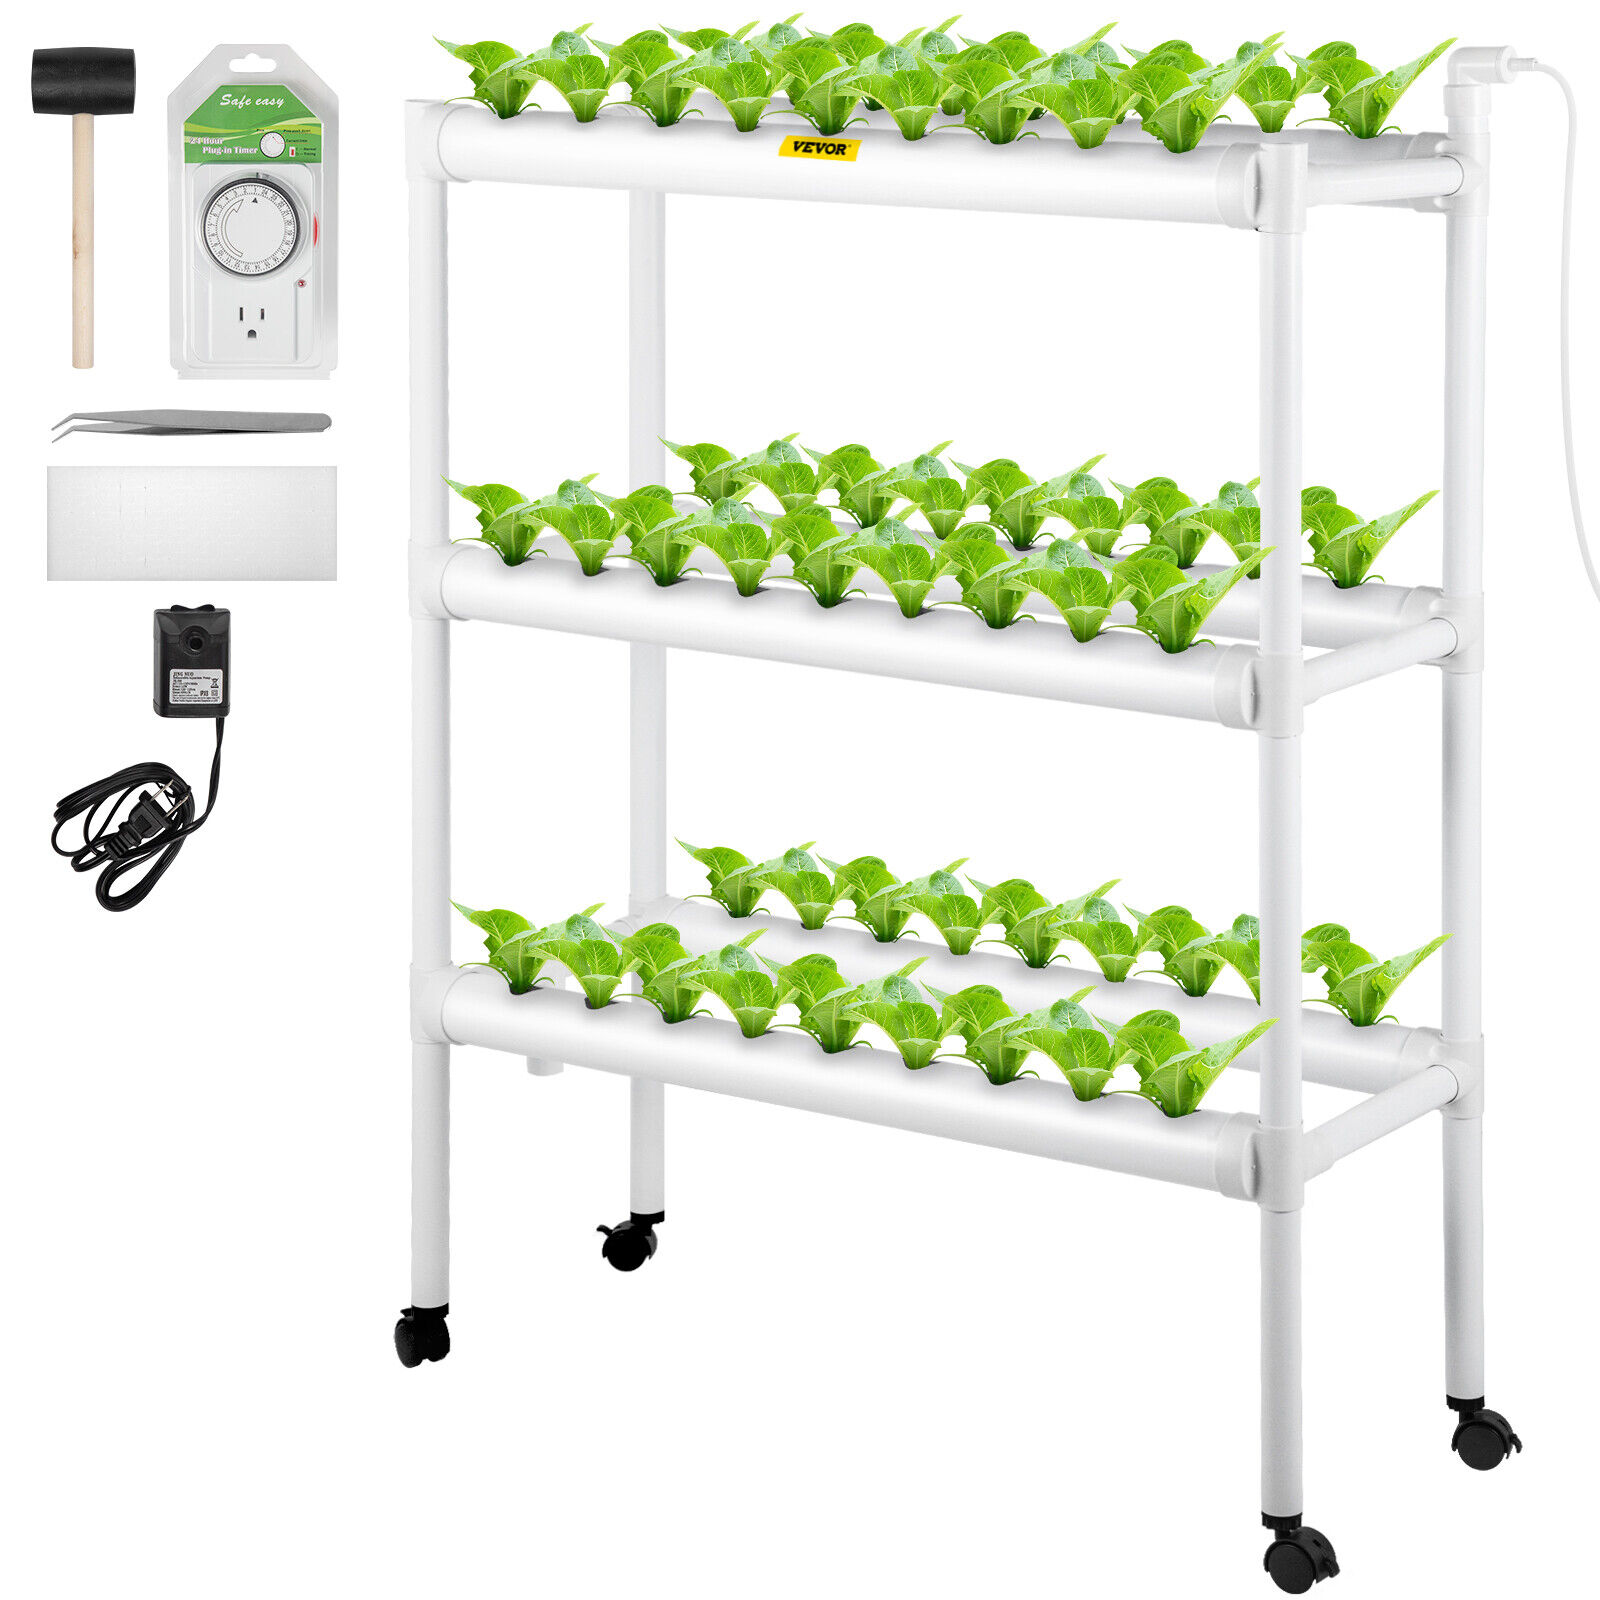 White Hydroponic Grow Kit Hydroponics System 54 Plant Sites 3 Layers 6 Pipes